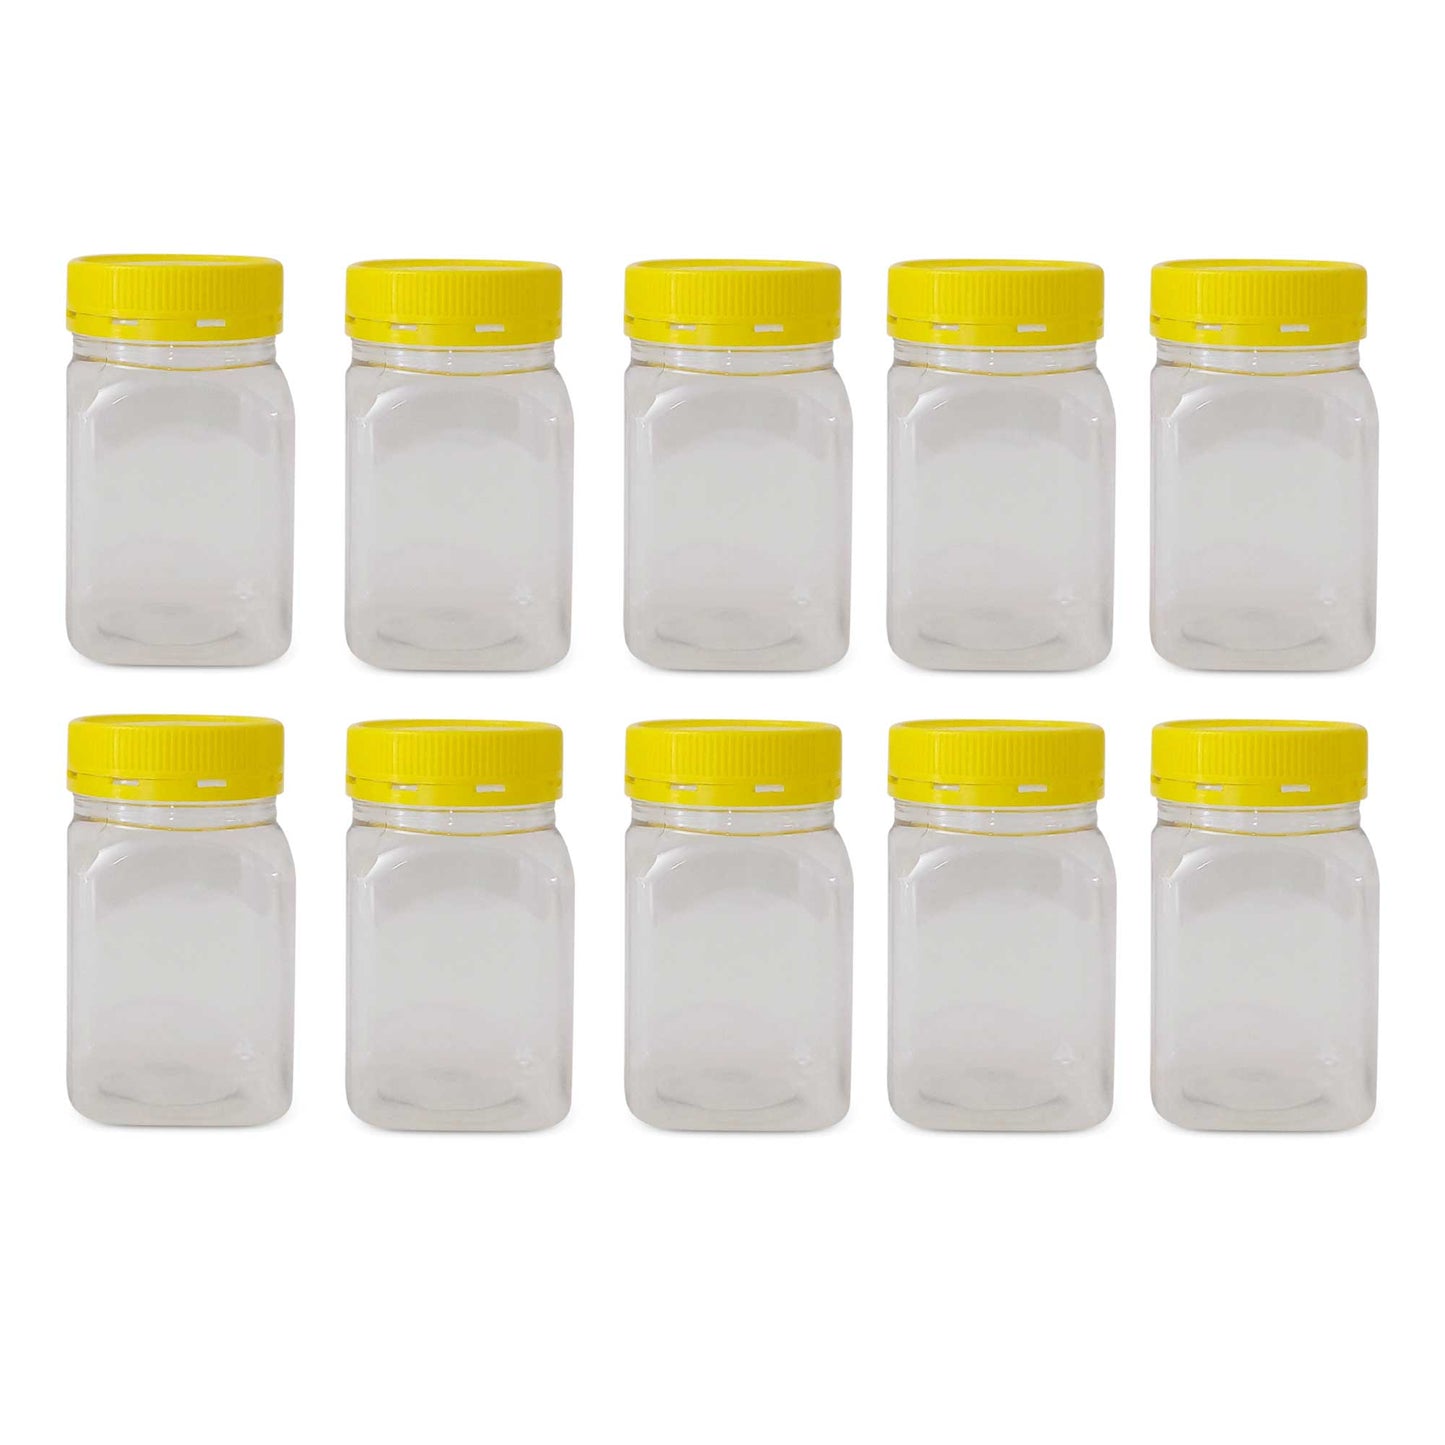 10x 500g Plastic Honey Jars + Lids - Square Clear Food Grade Packaging Containers